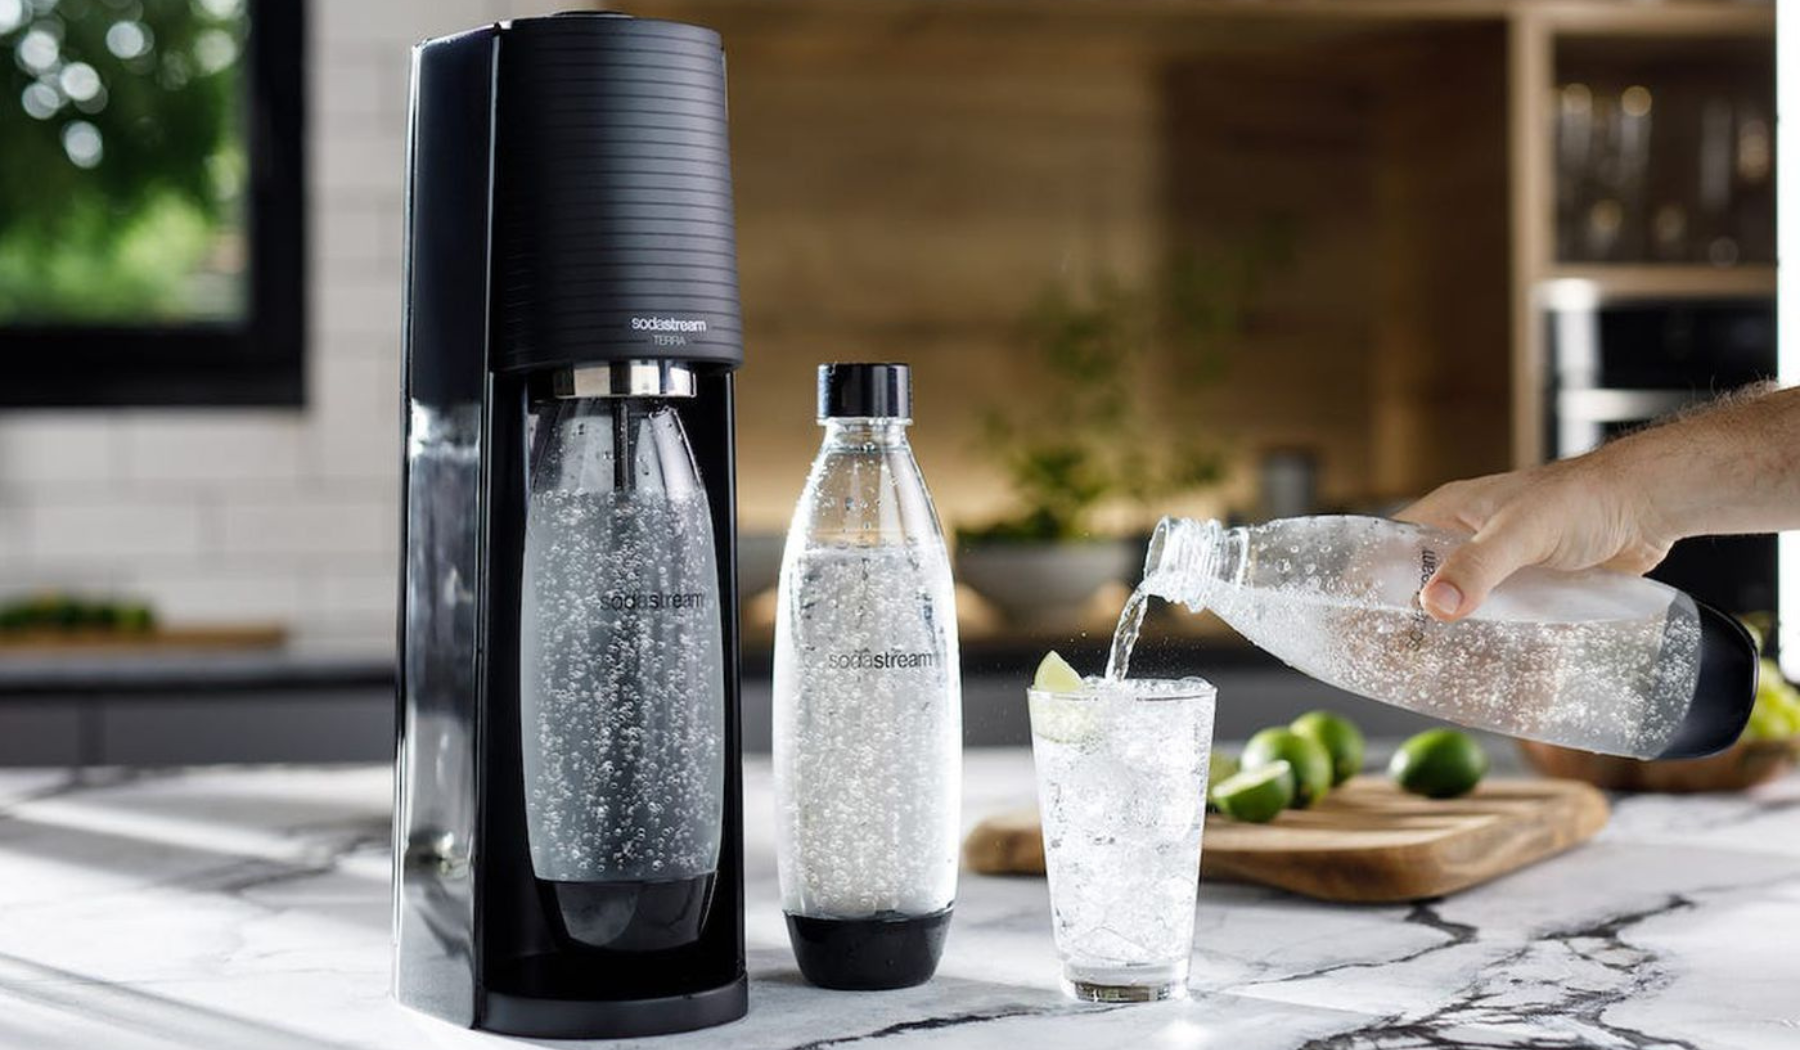 Person pouring sparkling water into glass next to SodaStream sparkling water maker on countertop